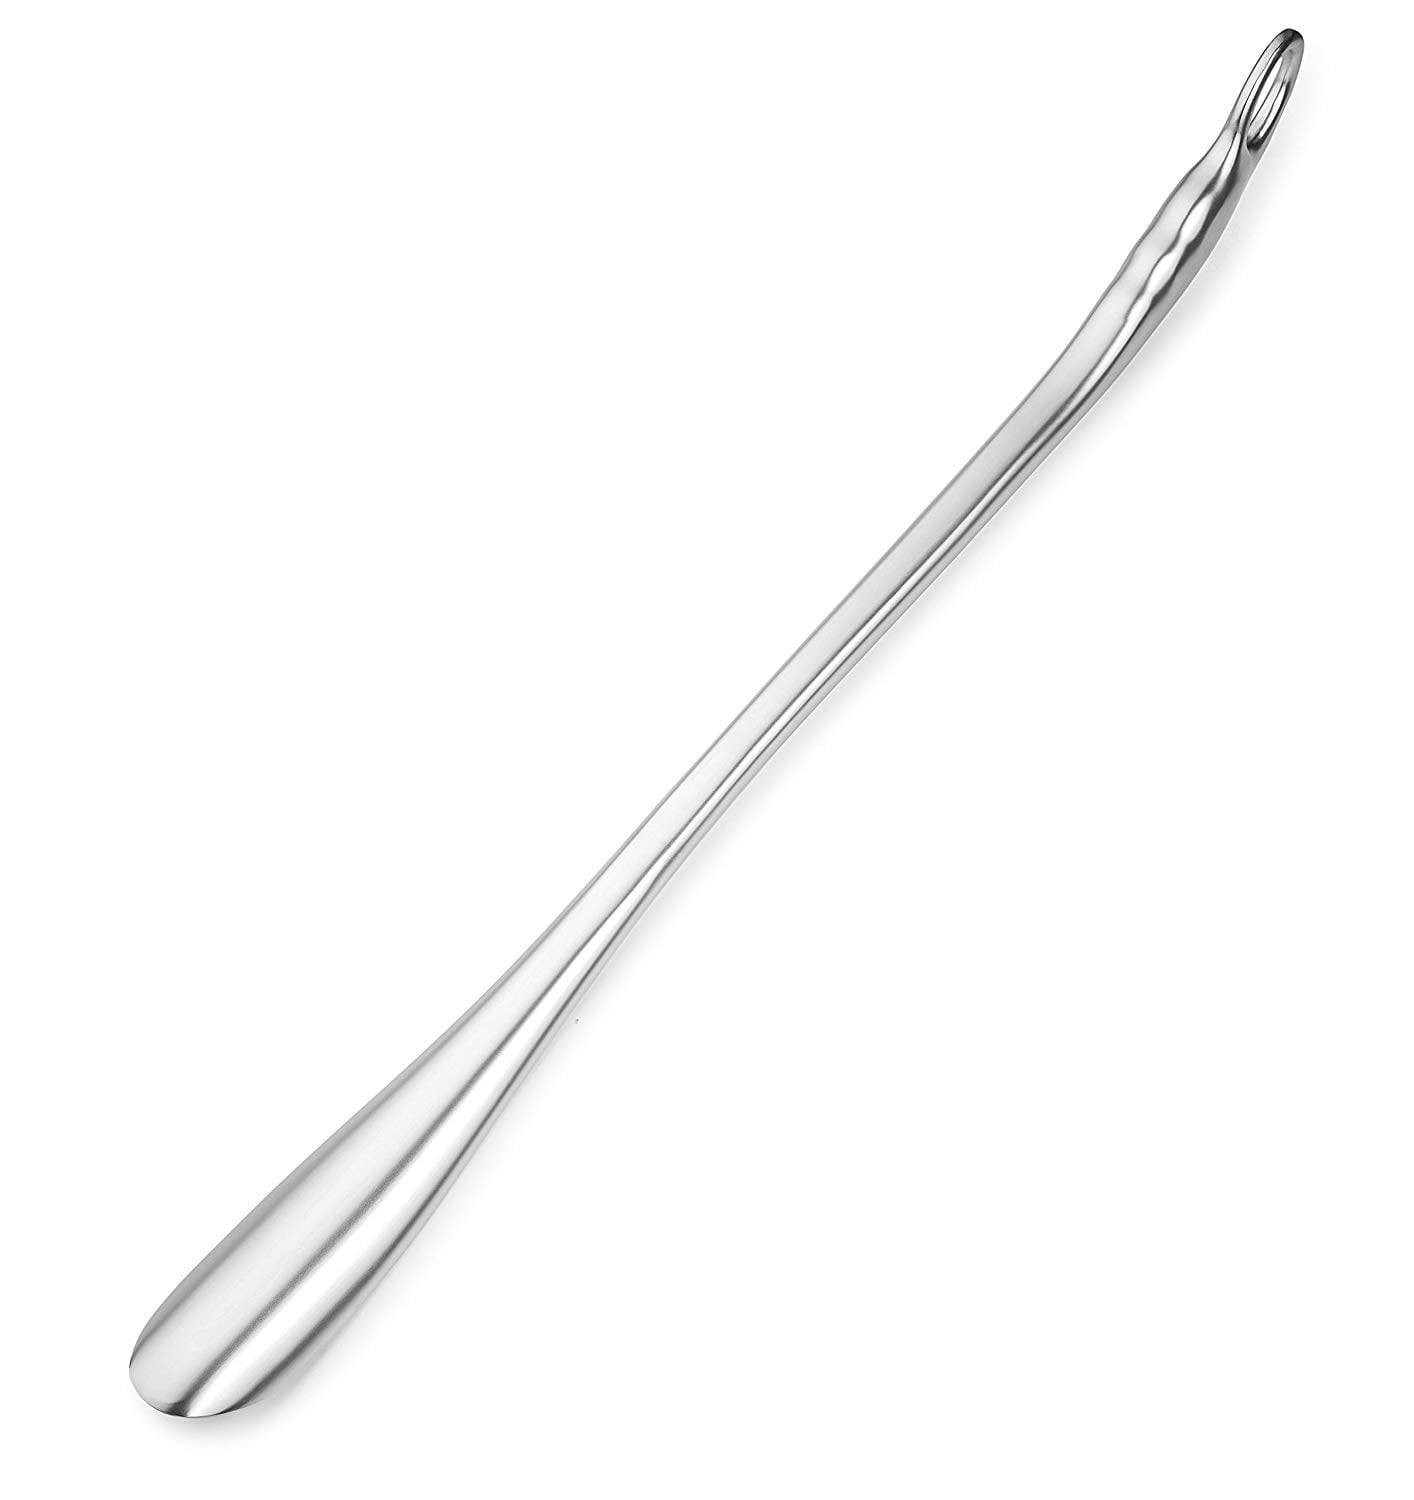 Durable and Sturdy for Shoes and Boots OrthoStep Shoe Horn Long Handle Metal 24 inch 